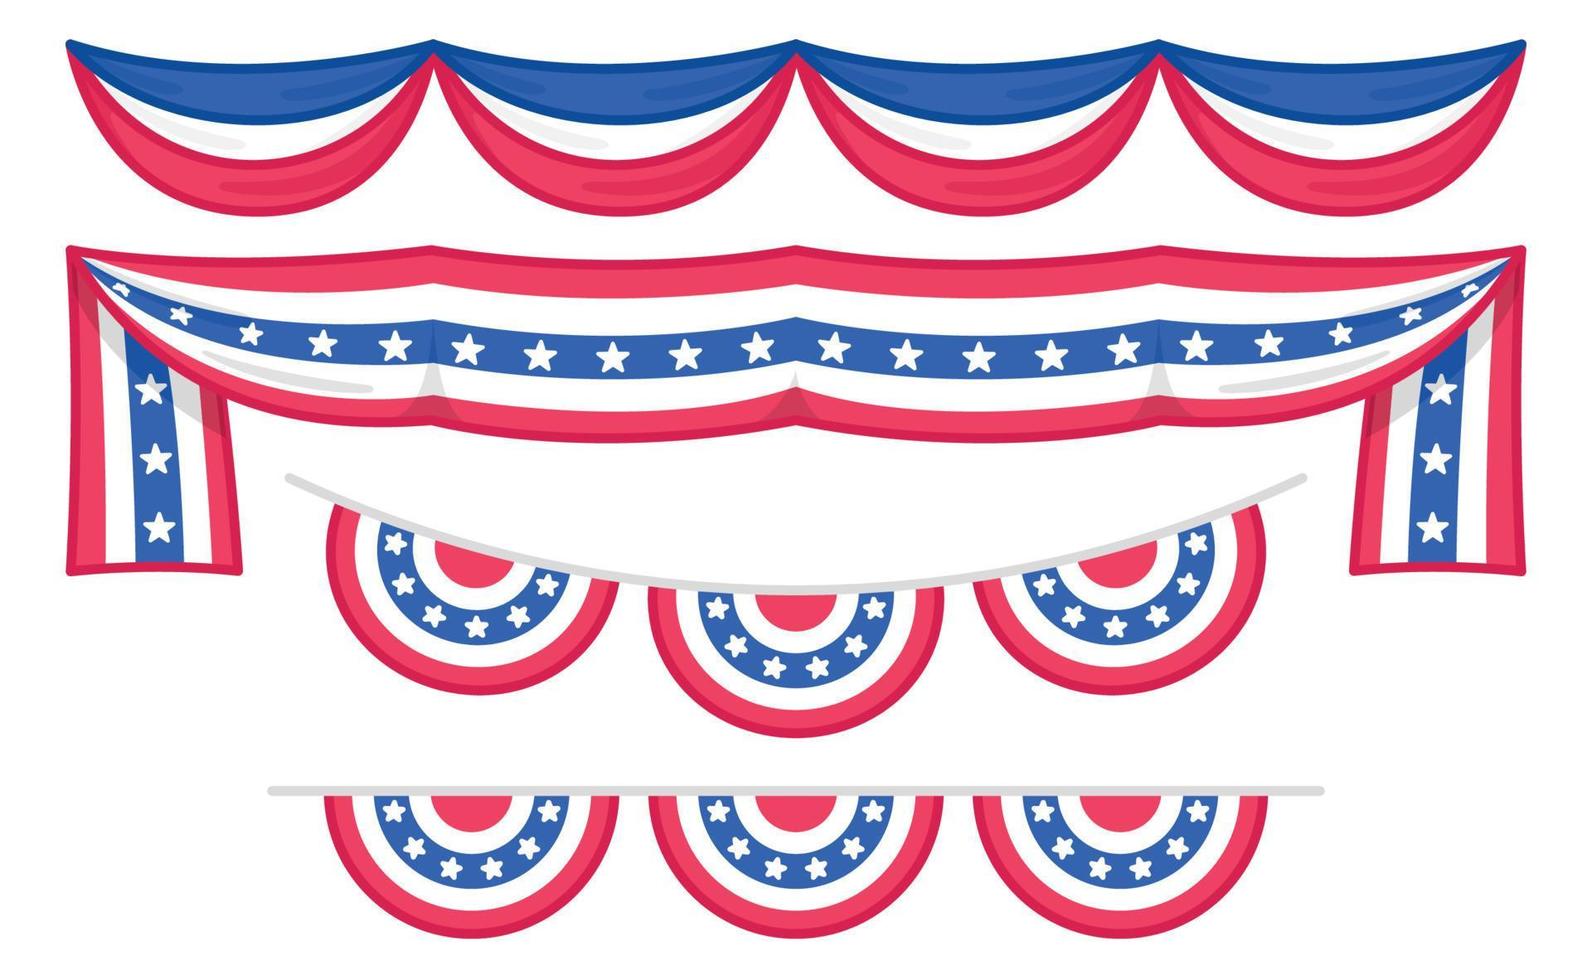 stage decoration with flag silk velvet Curtains or draperies in celebration of American Independence Day or memorial kawaii doodle flat vector illustration